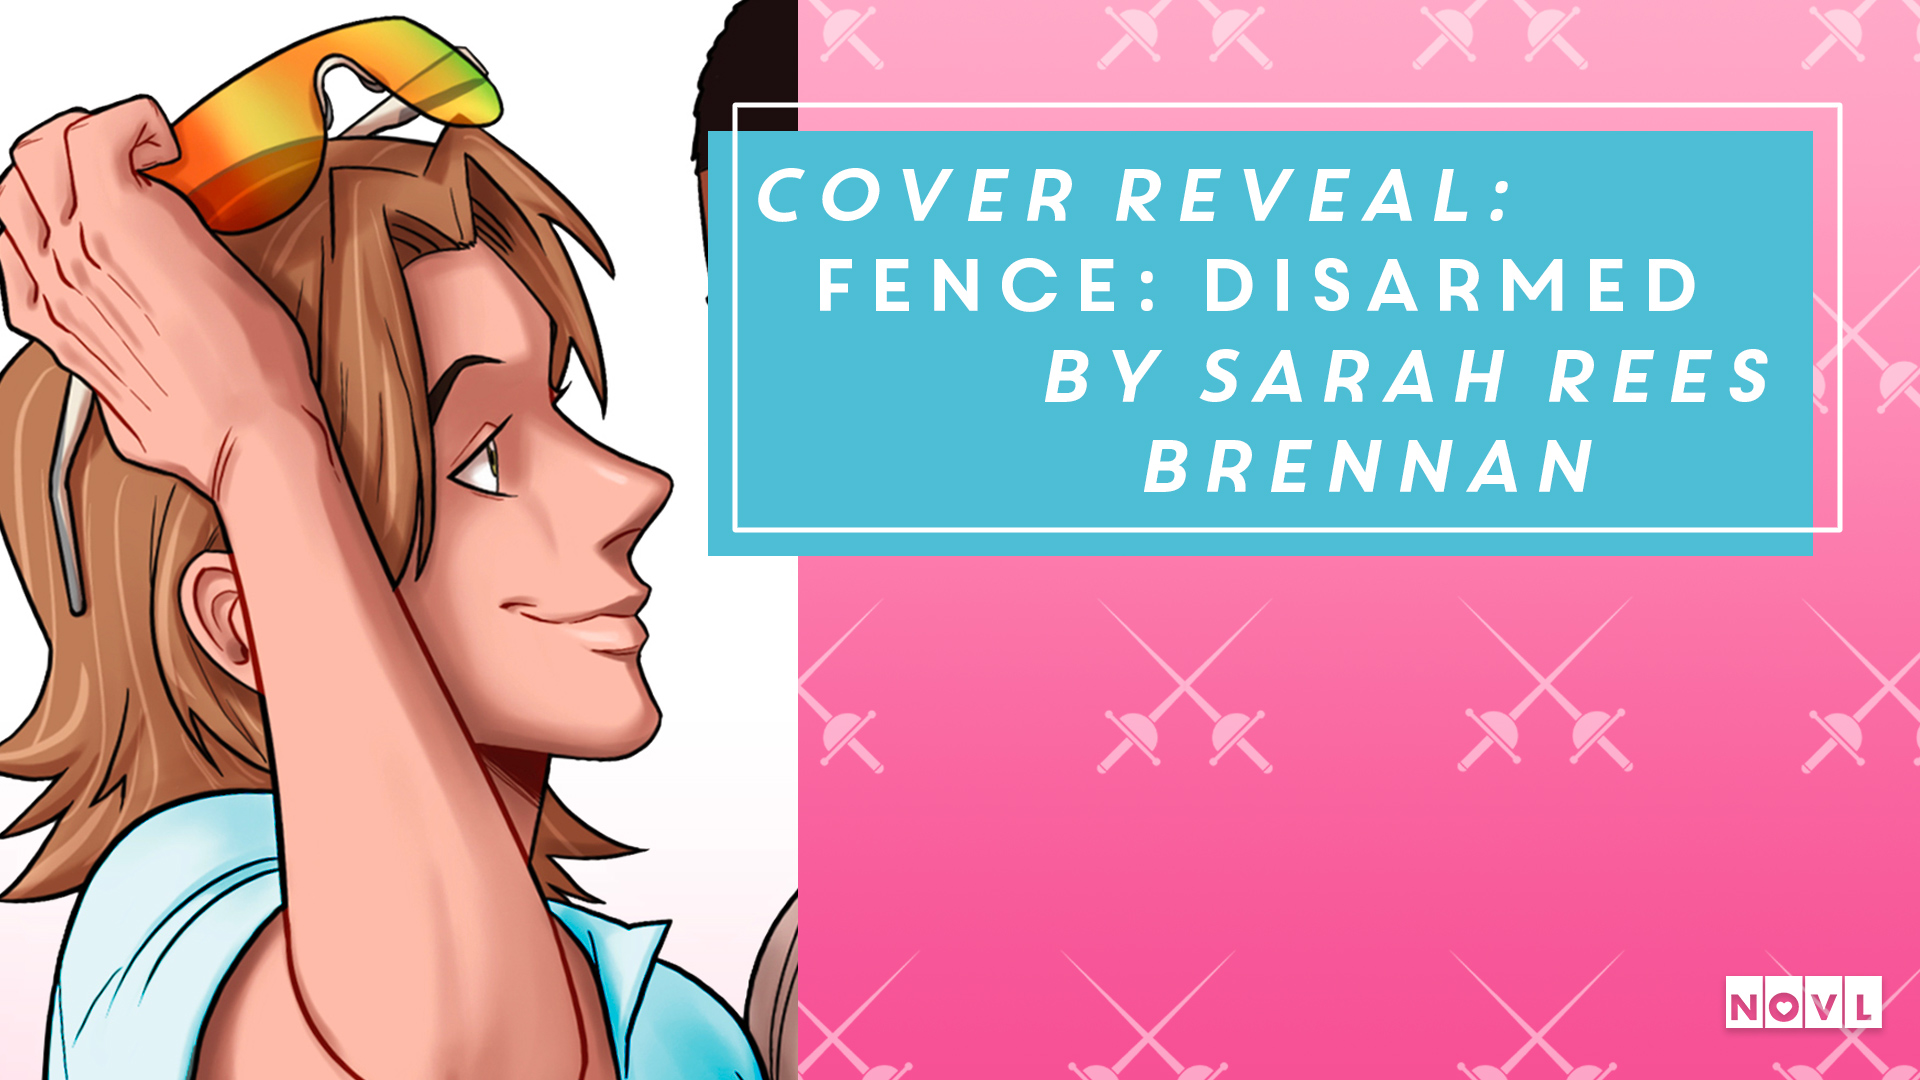 The NOVL Blog, Featured Image for Article: Cover Reveal: Fence: Disarmed by Sarah Rees Brennan